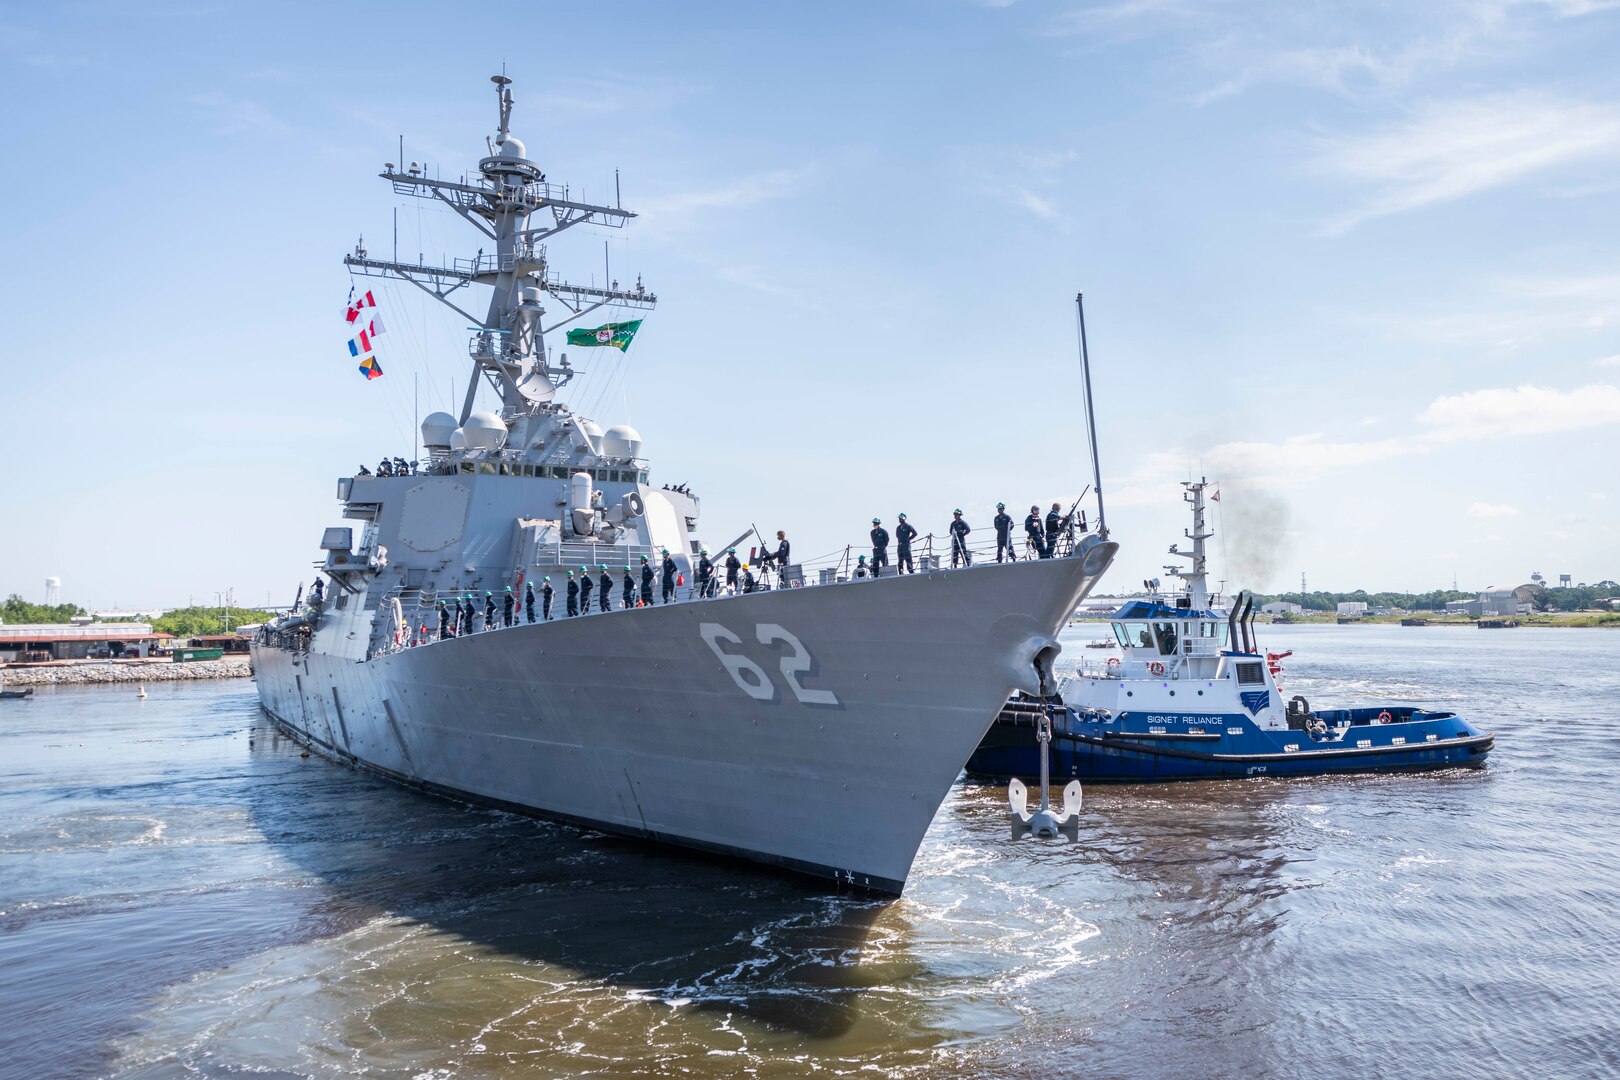 he guided-missile destroyer USS Fitzgerald (DDG 62)  prepares to depart Huntington Ingalls Industries, Ingalls Shipbuilding division’s Pascagoula shipyard June 13 to return to her homeport in San Diego.